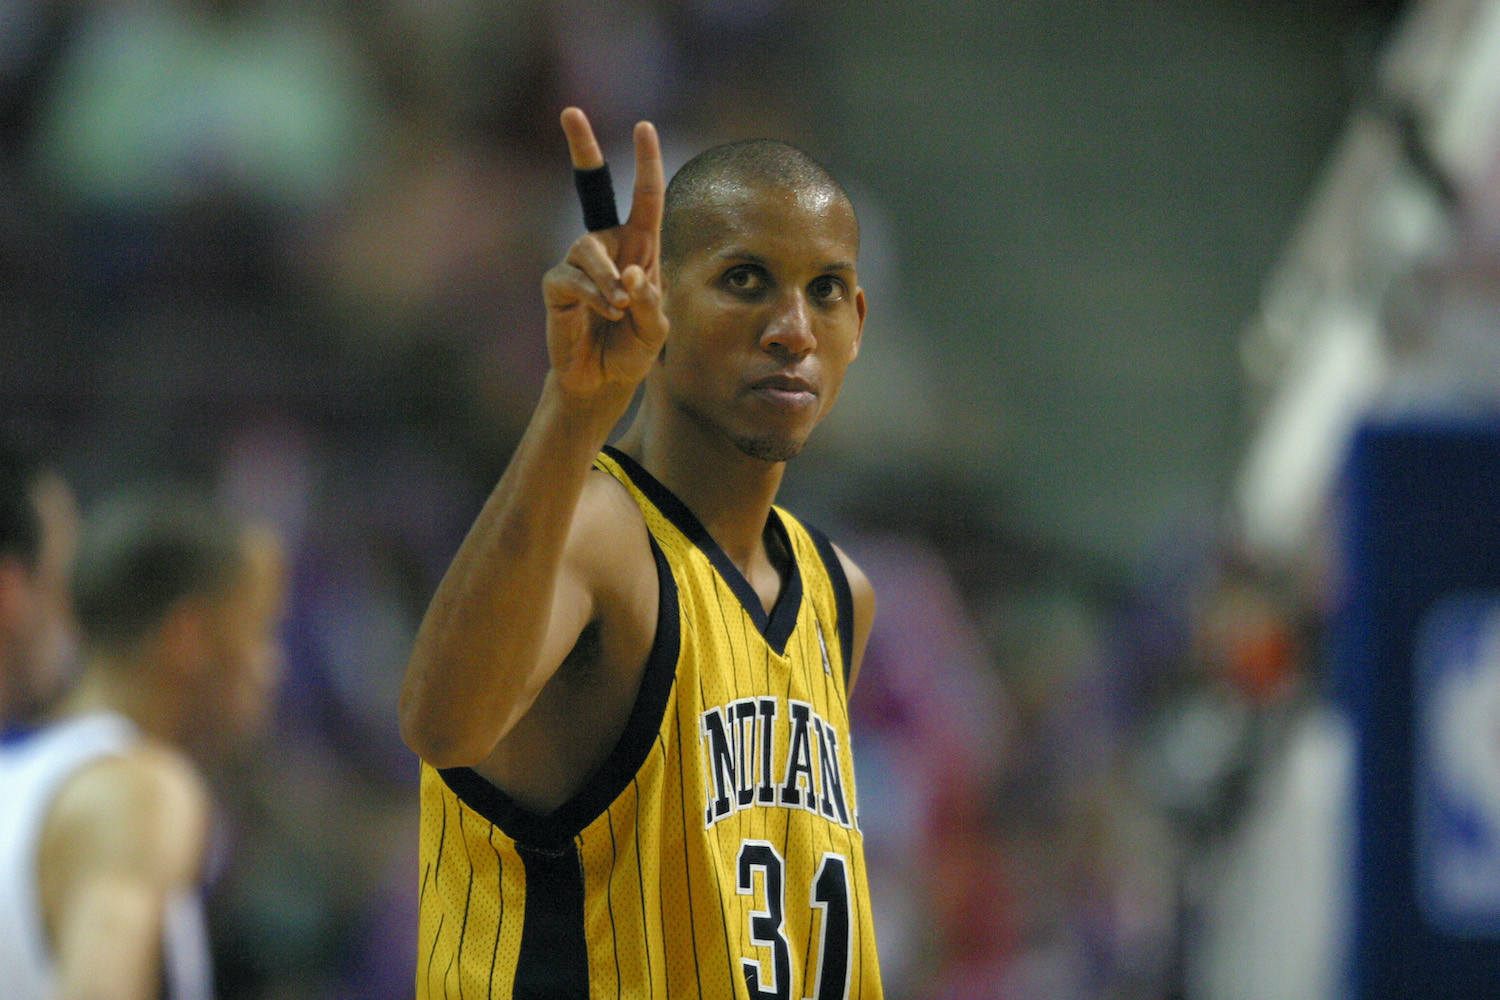 Indiana Pacers guard Reggie Miller gestures during an NBA game.